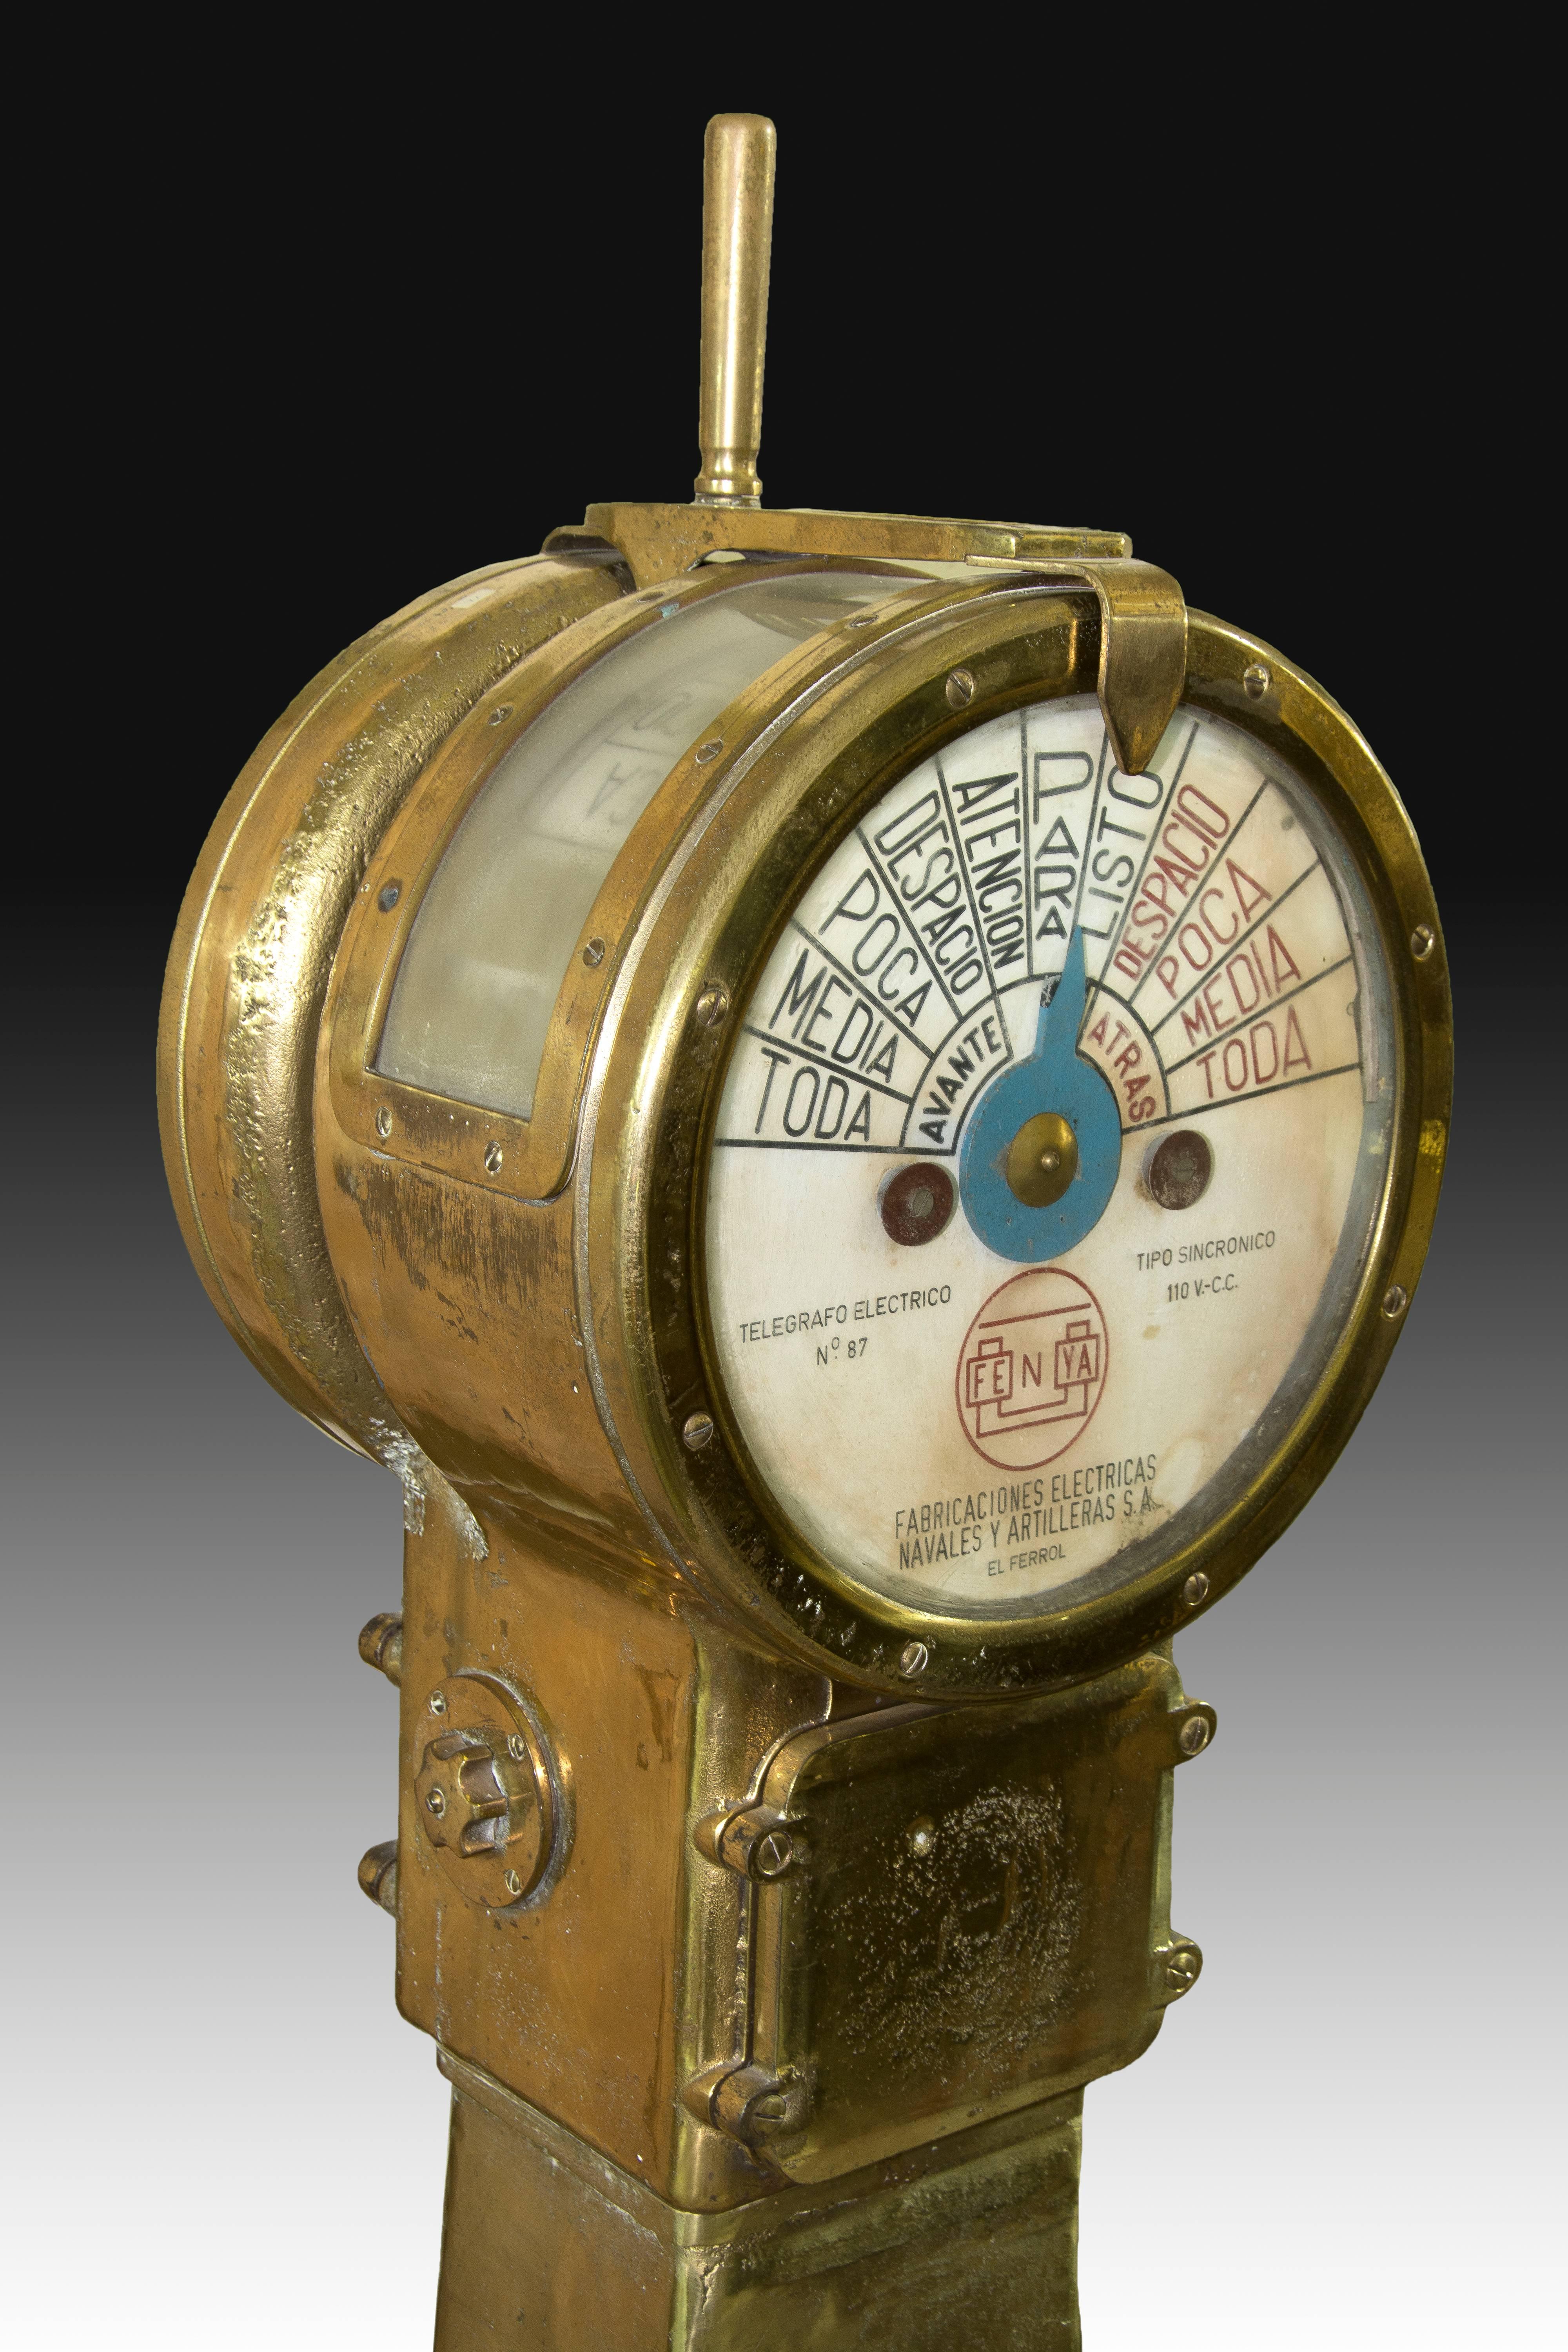 Engine order telegraph. Fenya, Fabricaciones Eléctricas, Navales y Artilleras, S.A., El Ferrol, Spain. Ca. Mid 20th century.
Metal, glass, carved wooden base.
Electric control bridge telegraph, of synchronous type, used, thanks to a replica in the